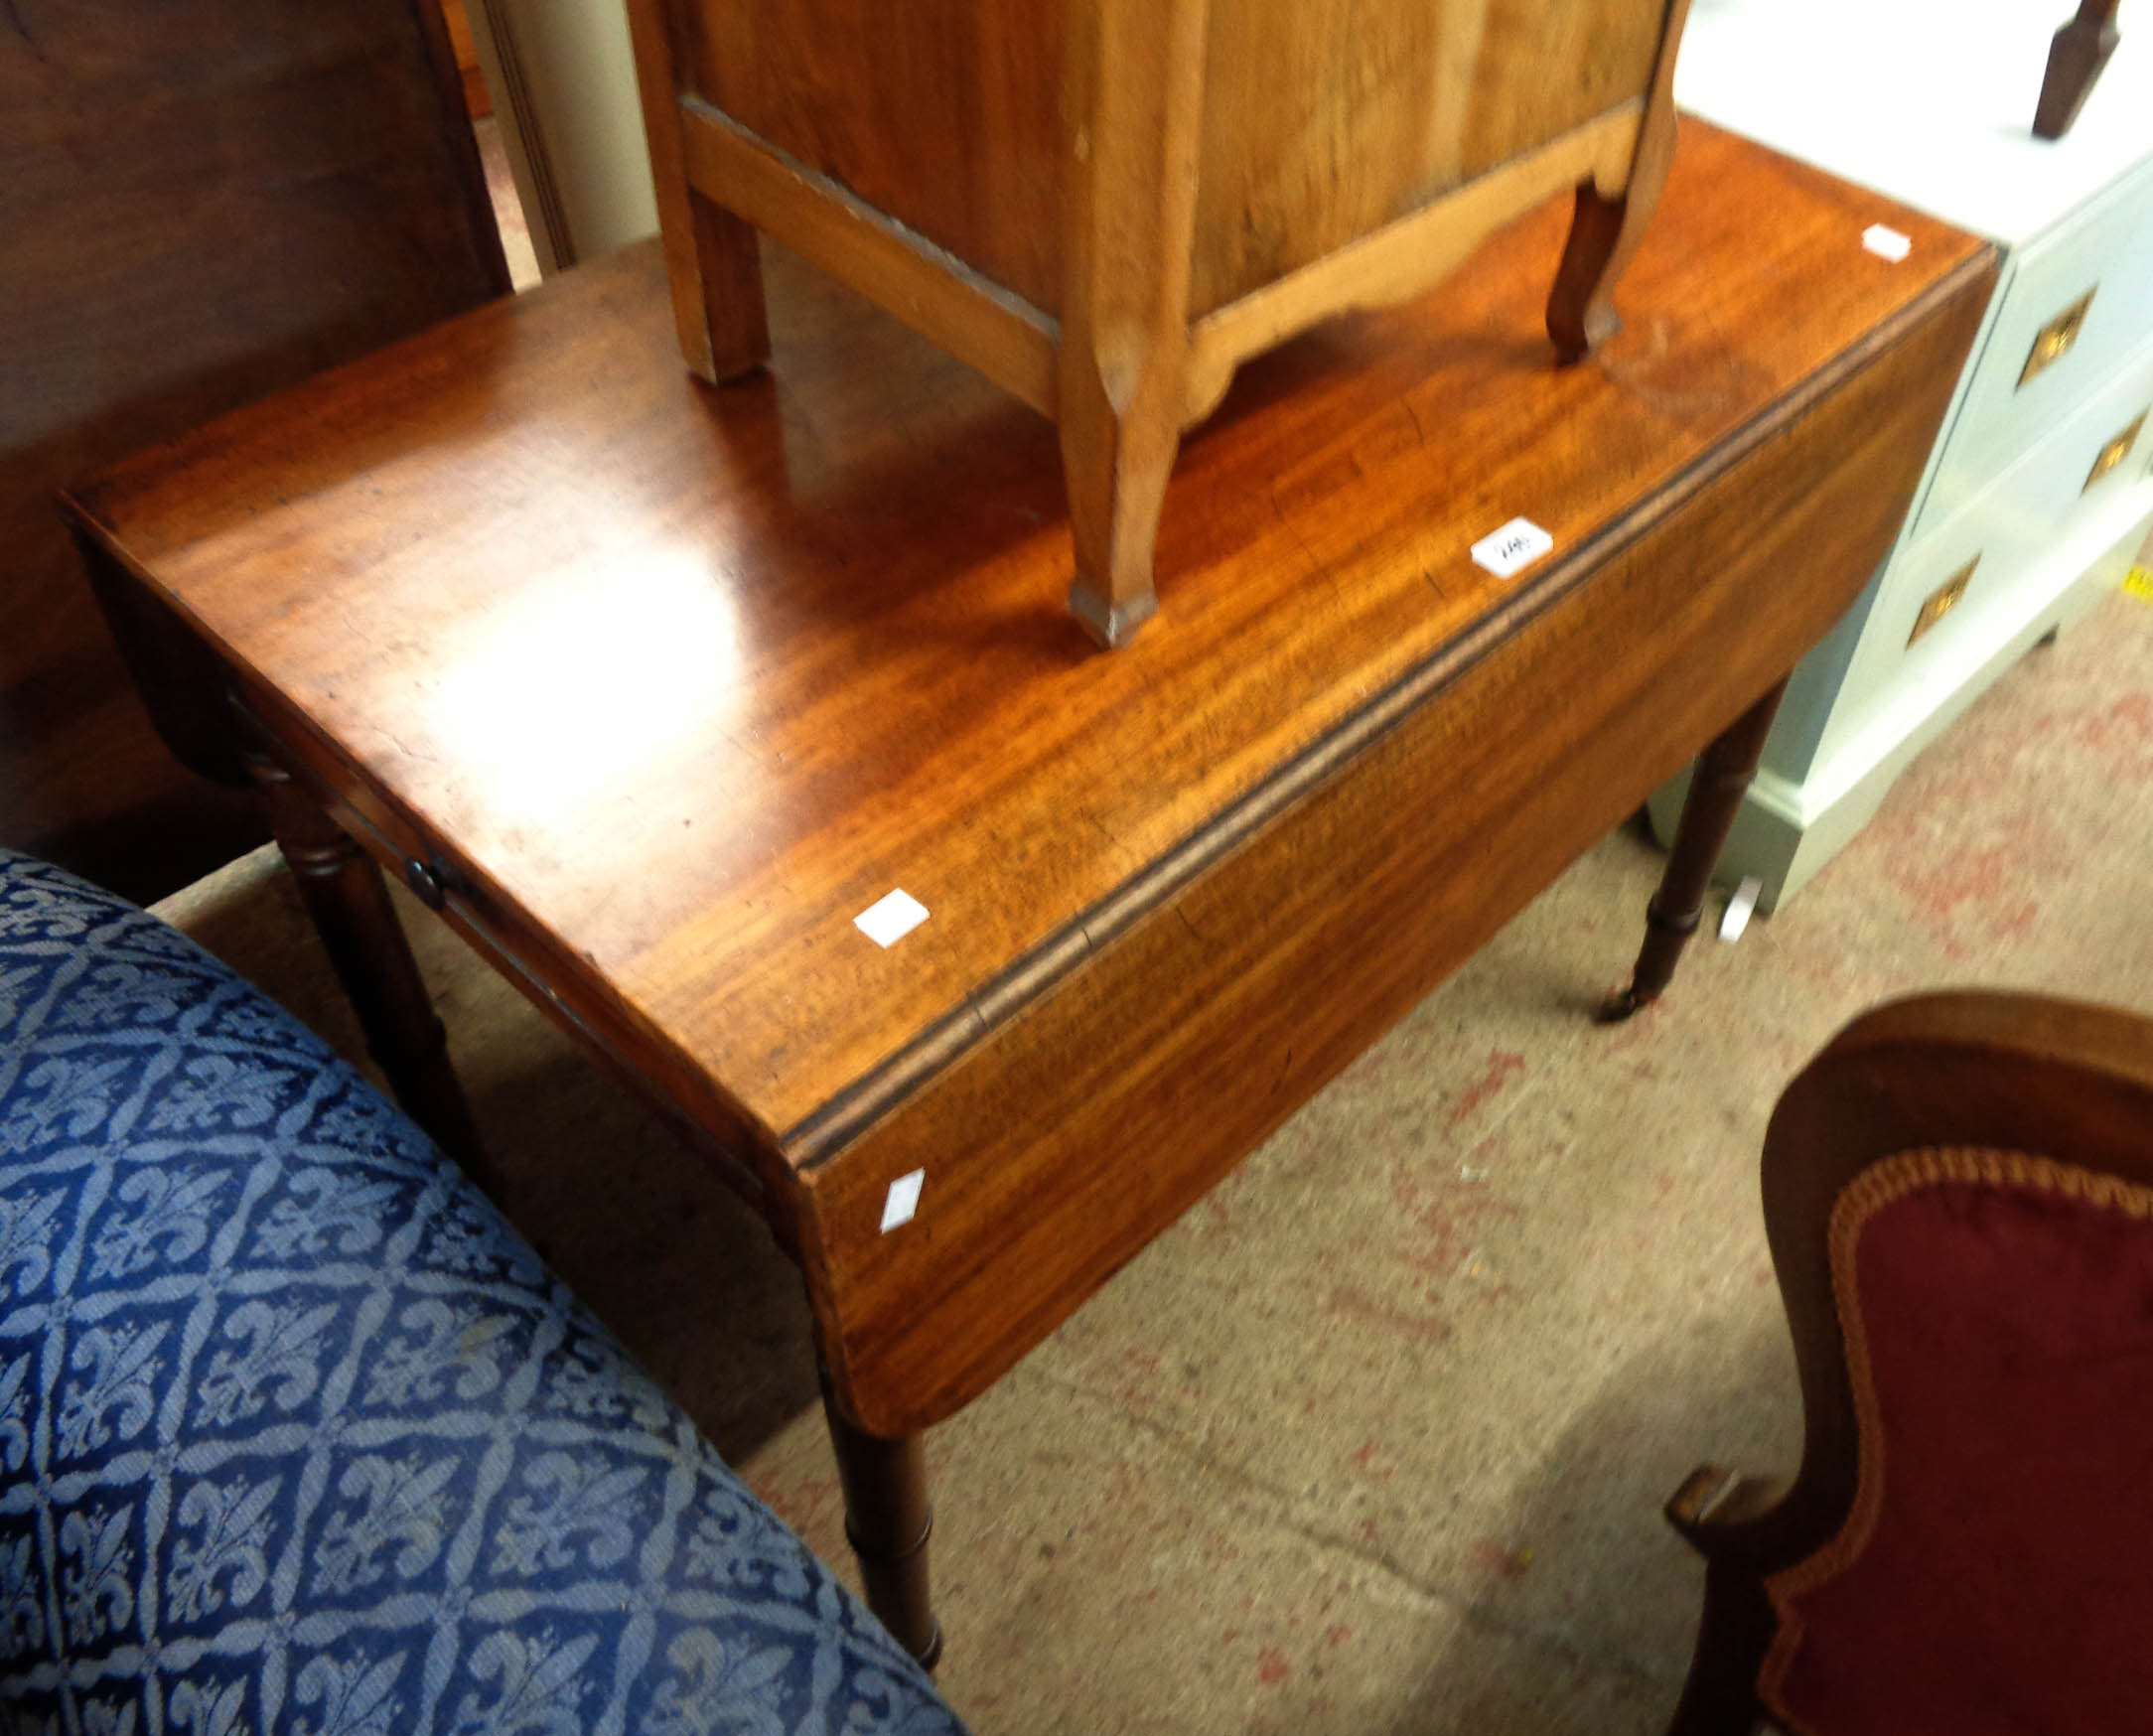 A 90cm 19th Century mahogany Pembroke table with drawer and opposing dummy drawer front, set on ring